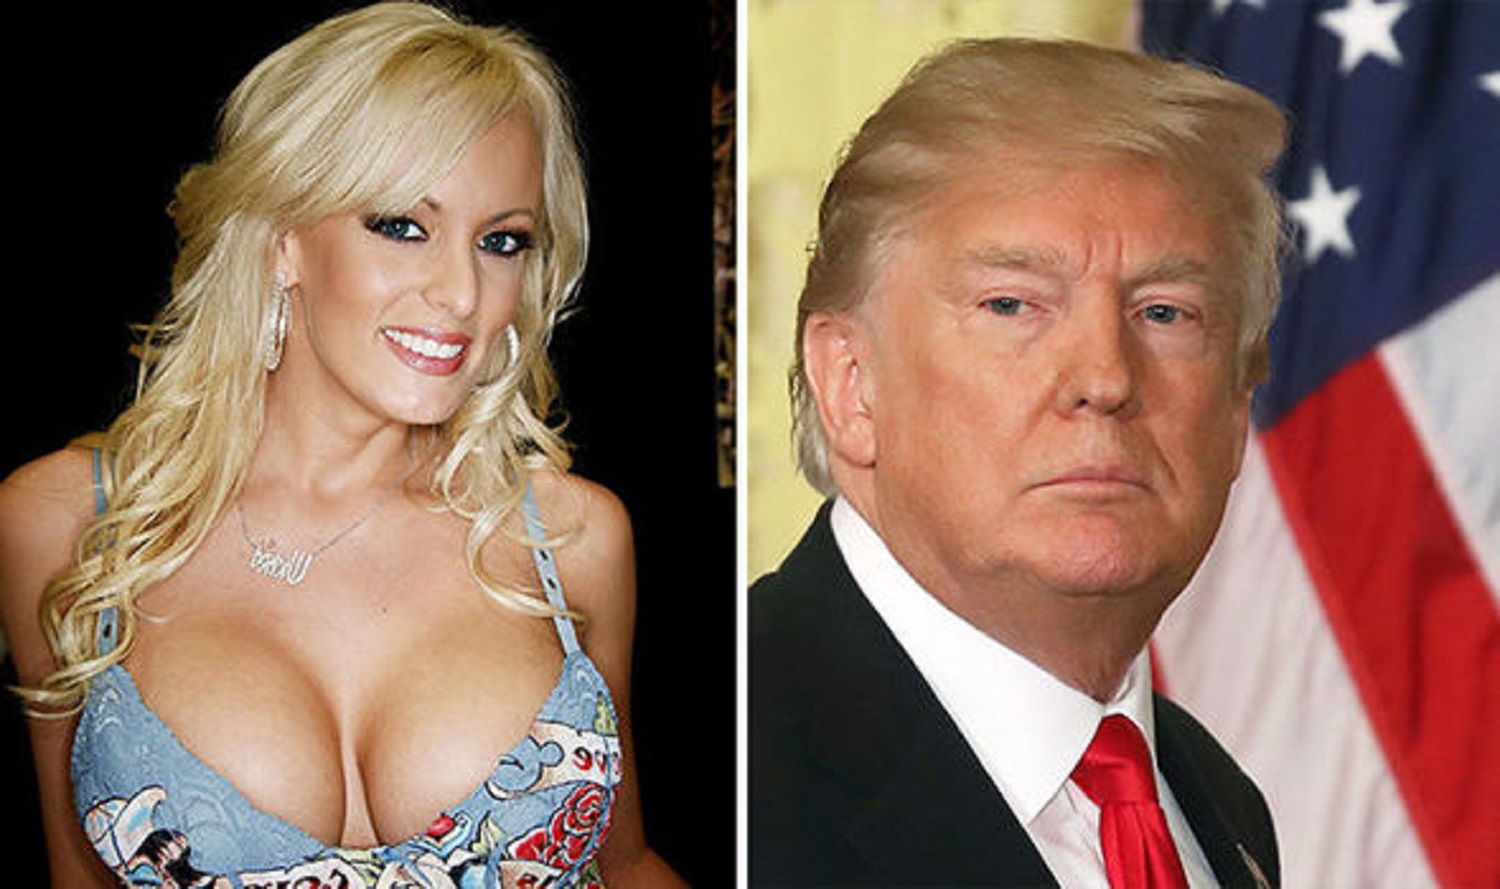 President Donald Trump will give 33 lakh rupees to this porn star